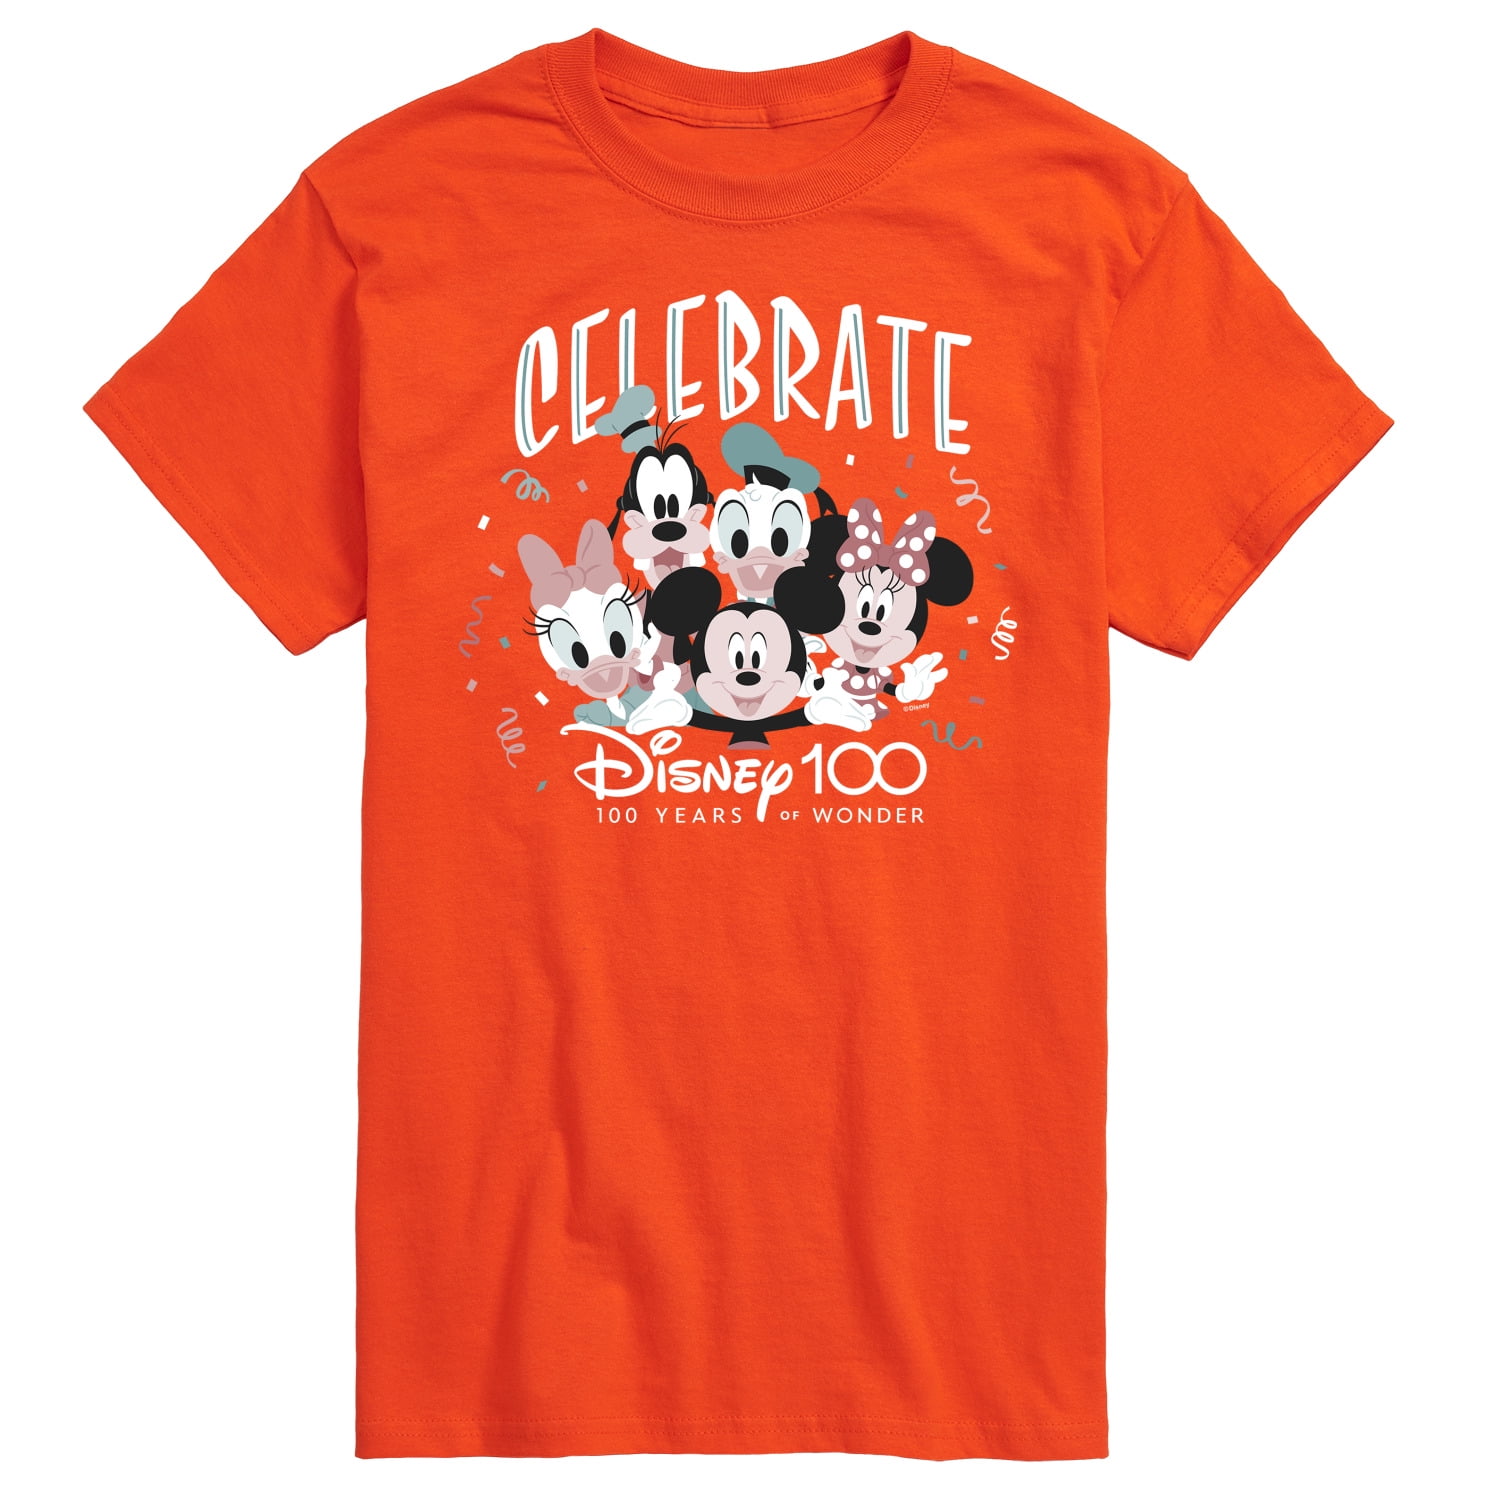 Disney 100 - 100 Years of Wonder - Celebrate Disney 100 - Mickey Mouse  Clubhouse - Men\'s Short Sleeve Graphic T-Shirt